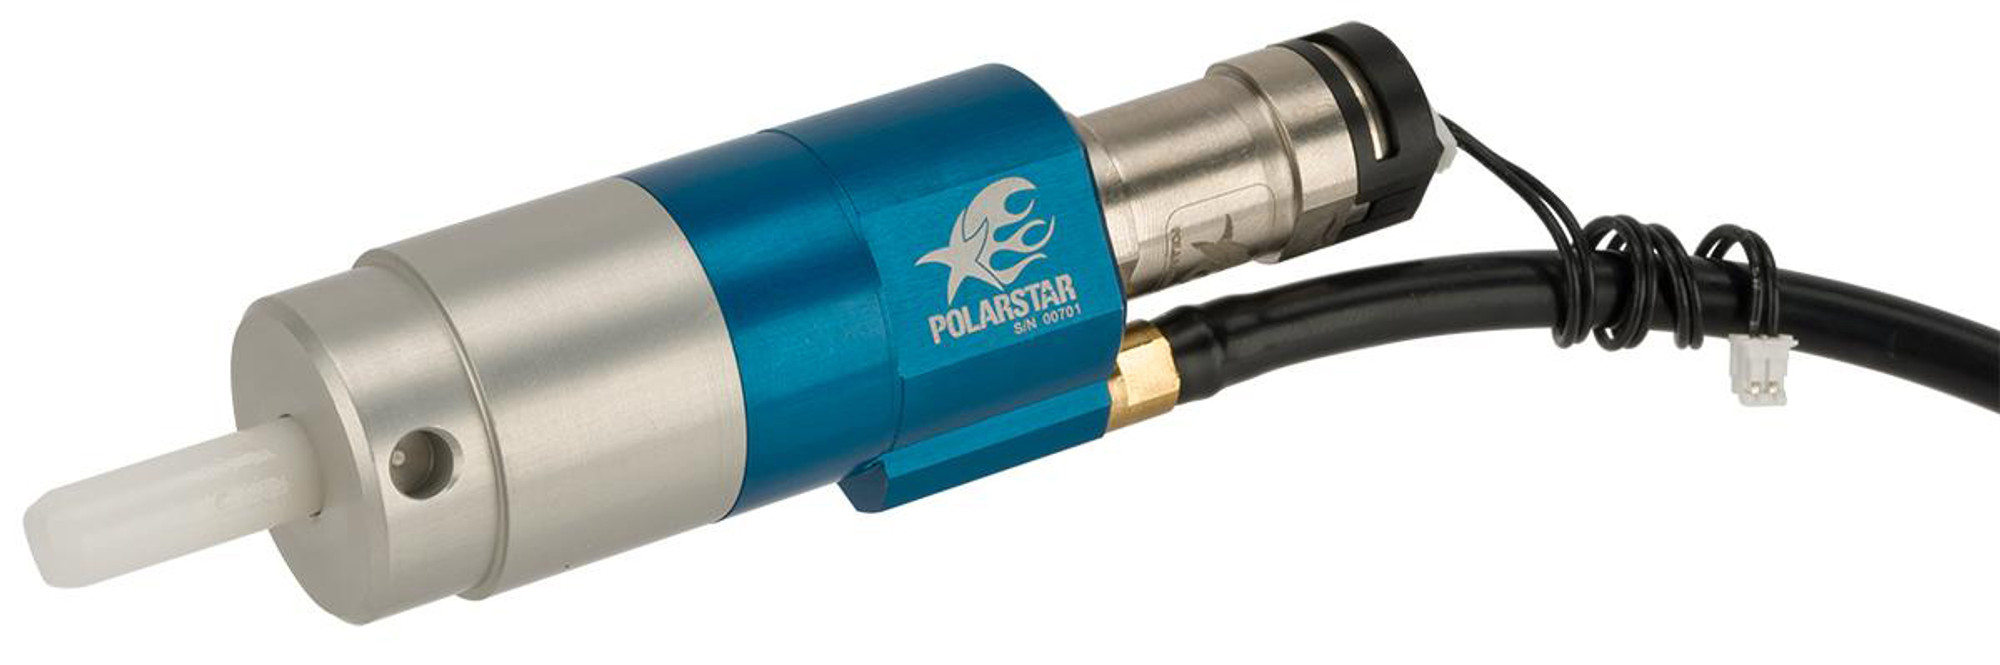 PolarStar Airsoft F1 HPA Electro-Pneumatic System with Full Size FCU (Model: M249)